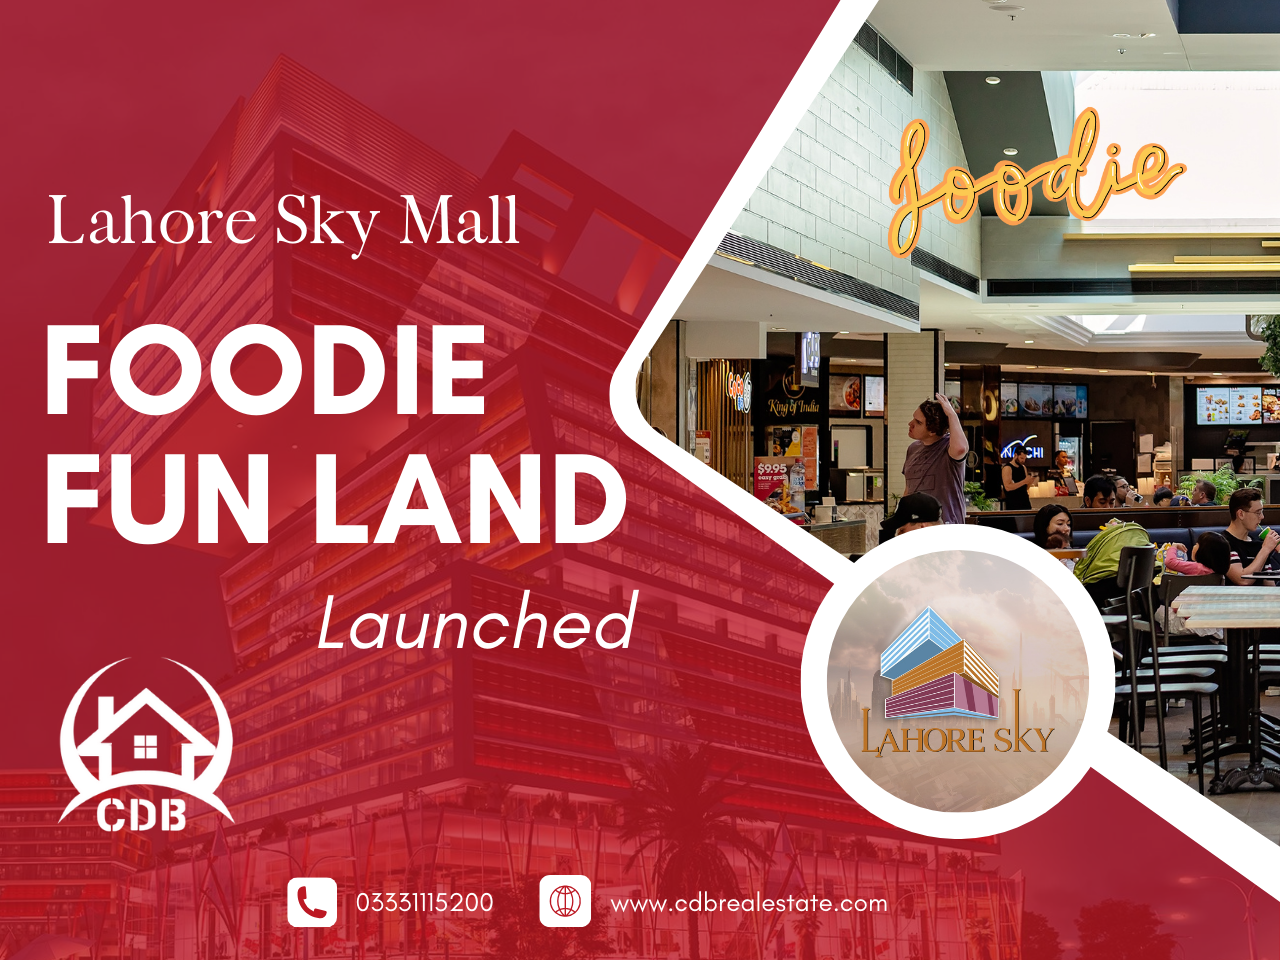 Foodie Fun Land Launched at Lahore Sky Mall